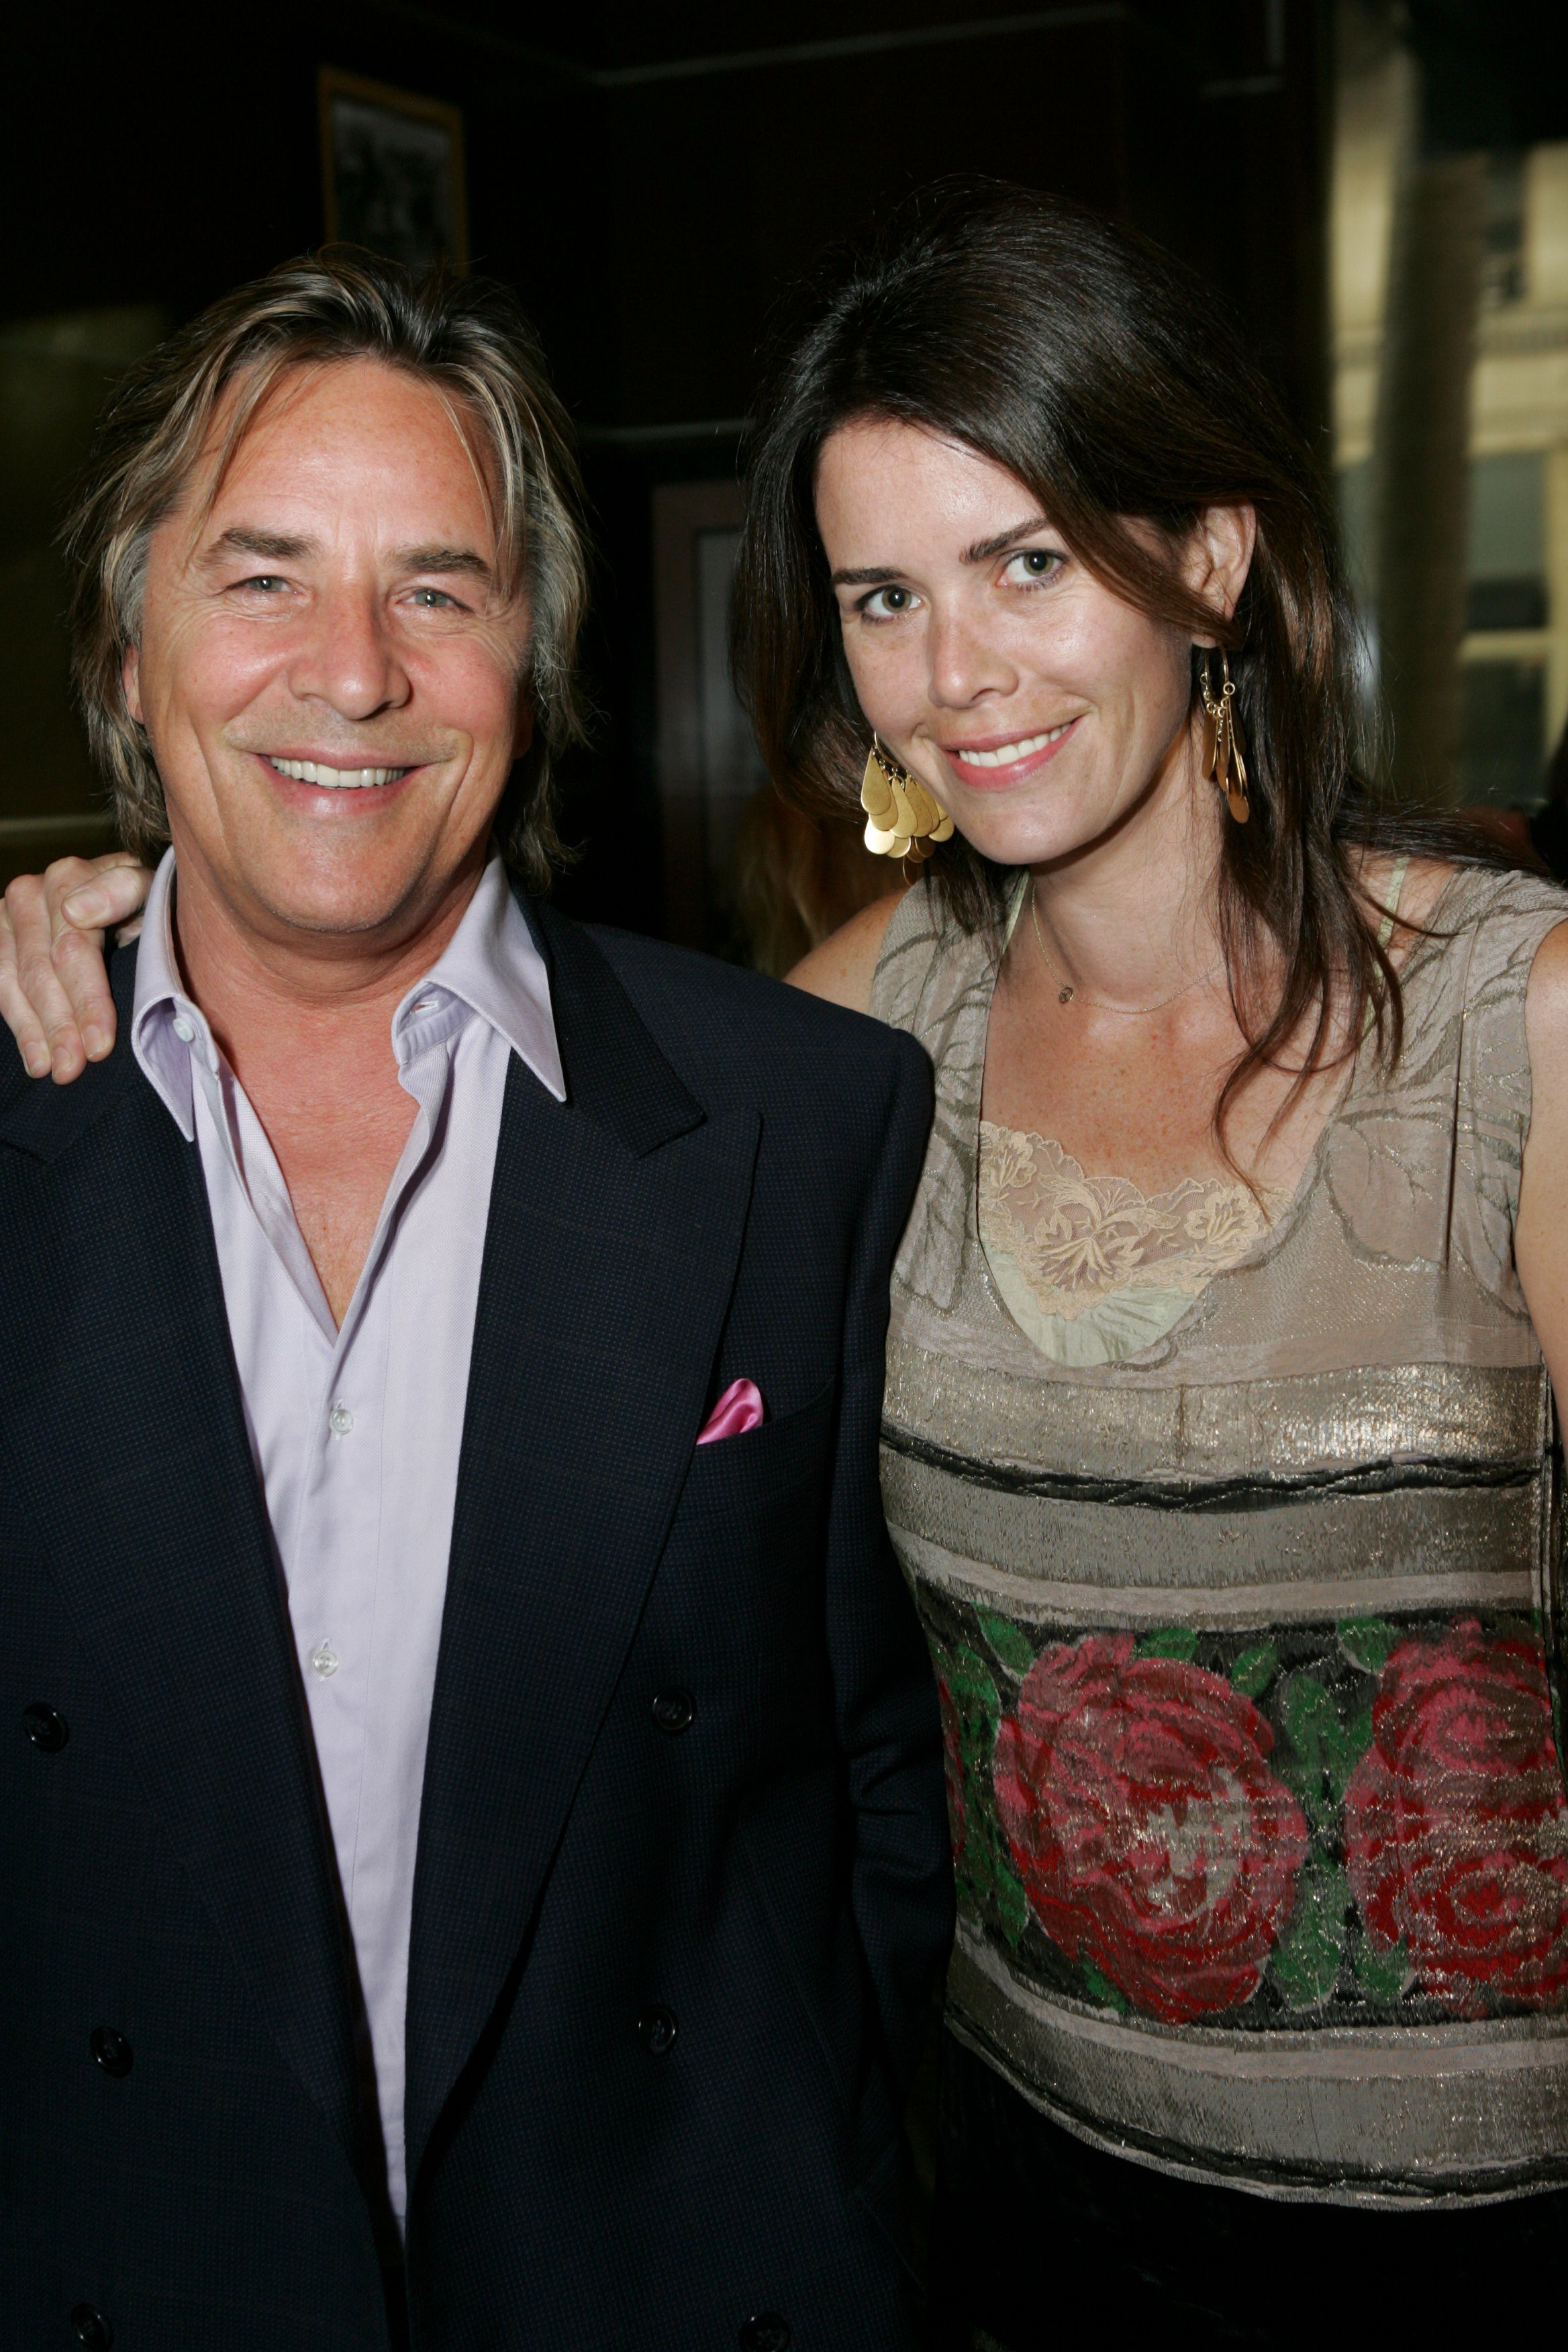 Don Johnson, Wife Kelley Phleger 'Live a Charmed Life'